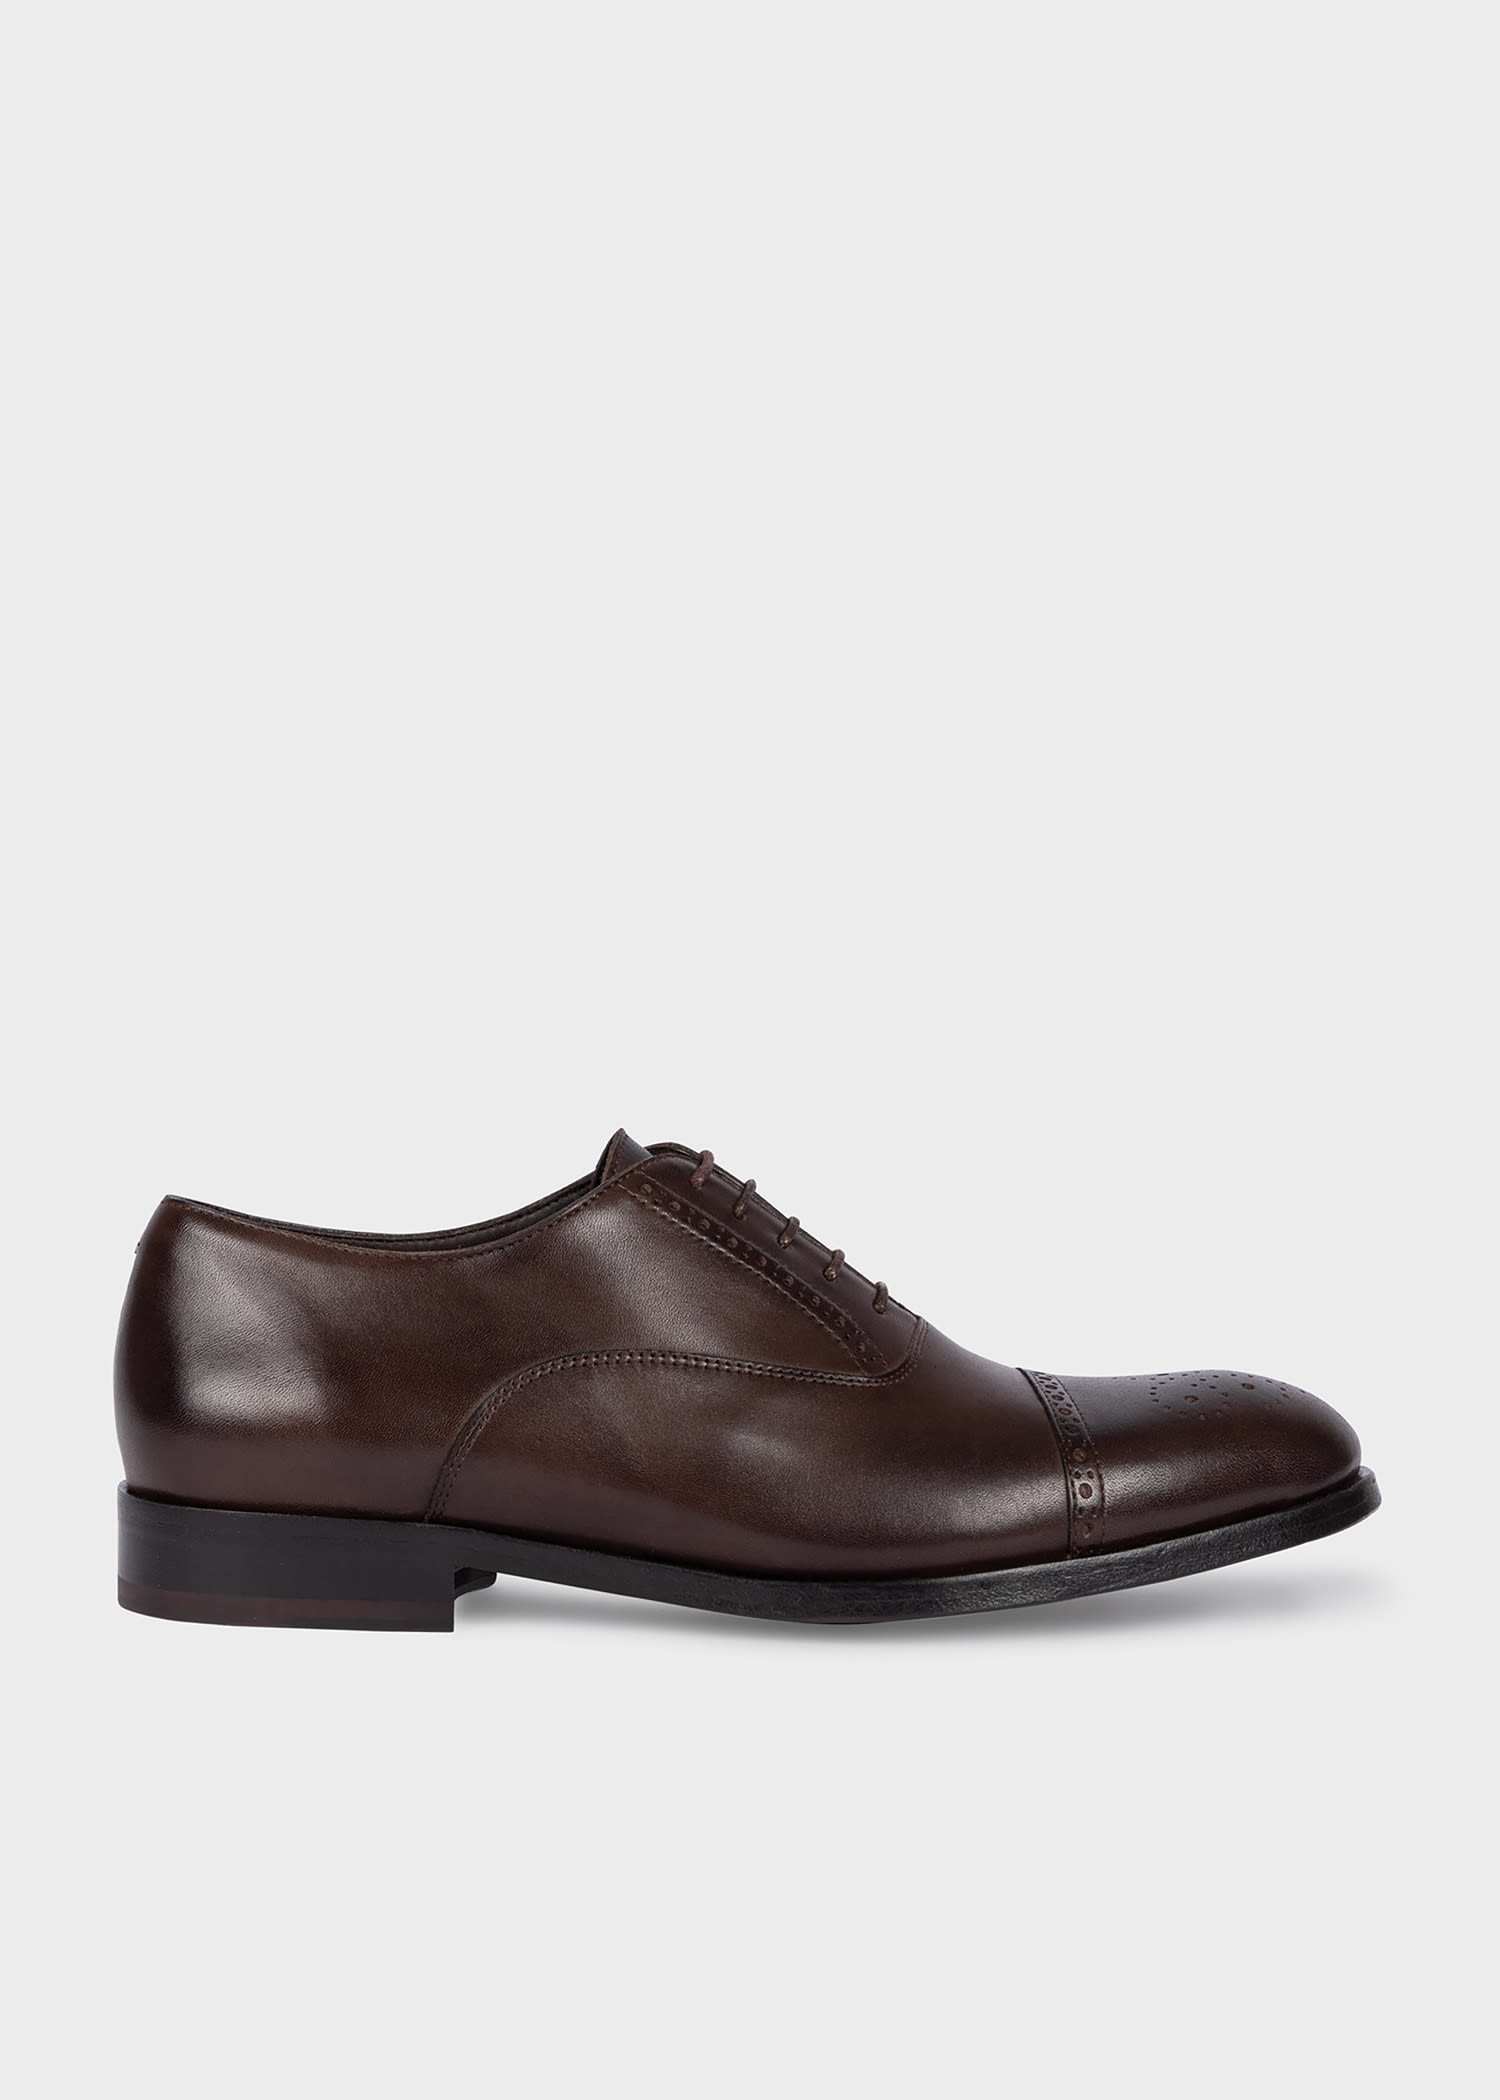 Men's Dark Brown Leather 'Maltby' Shoes